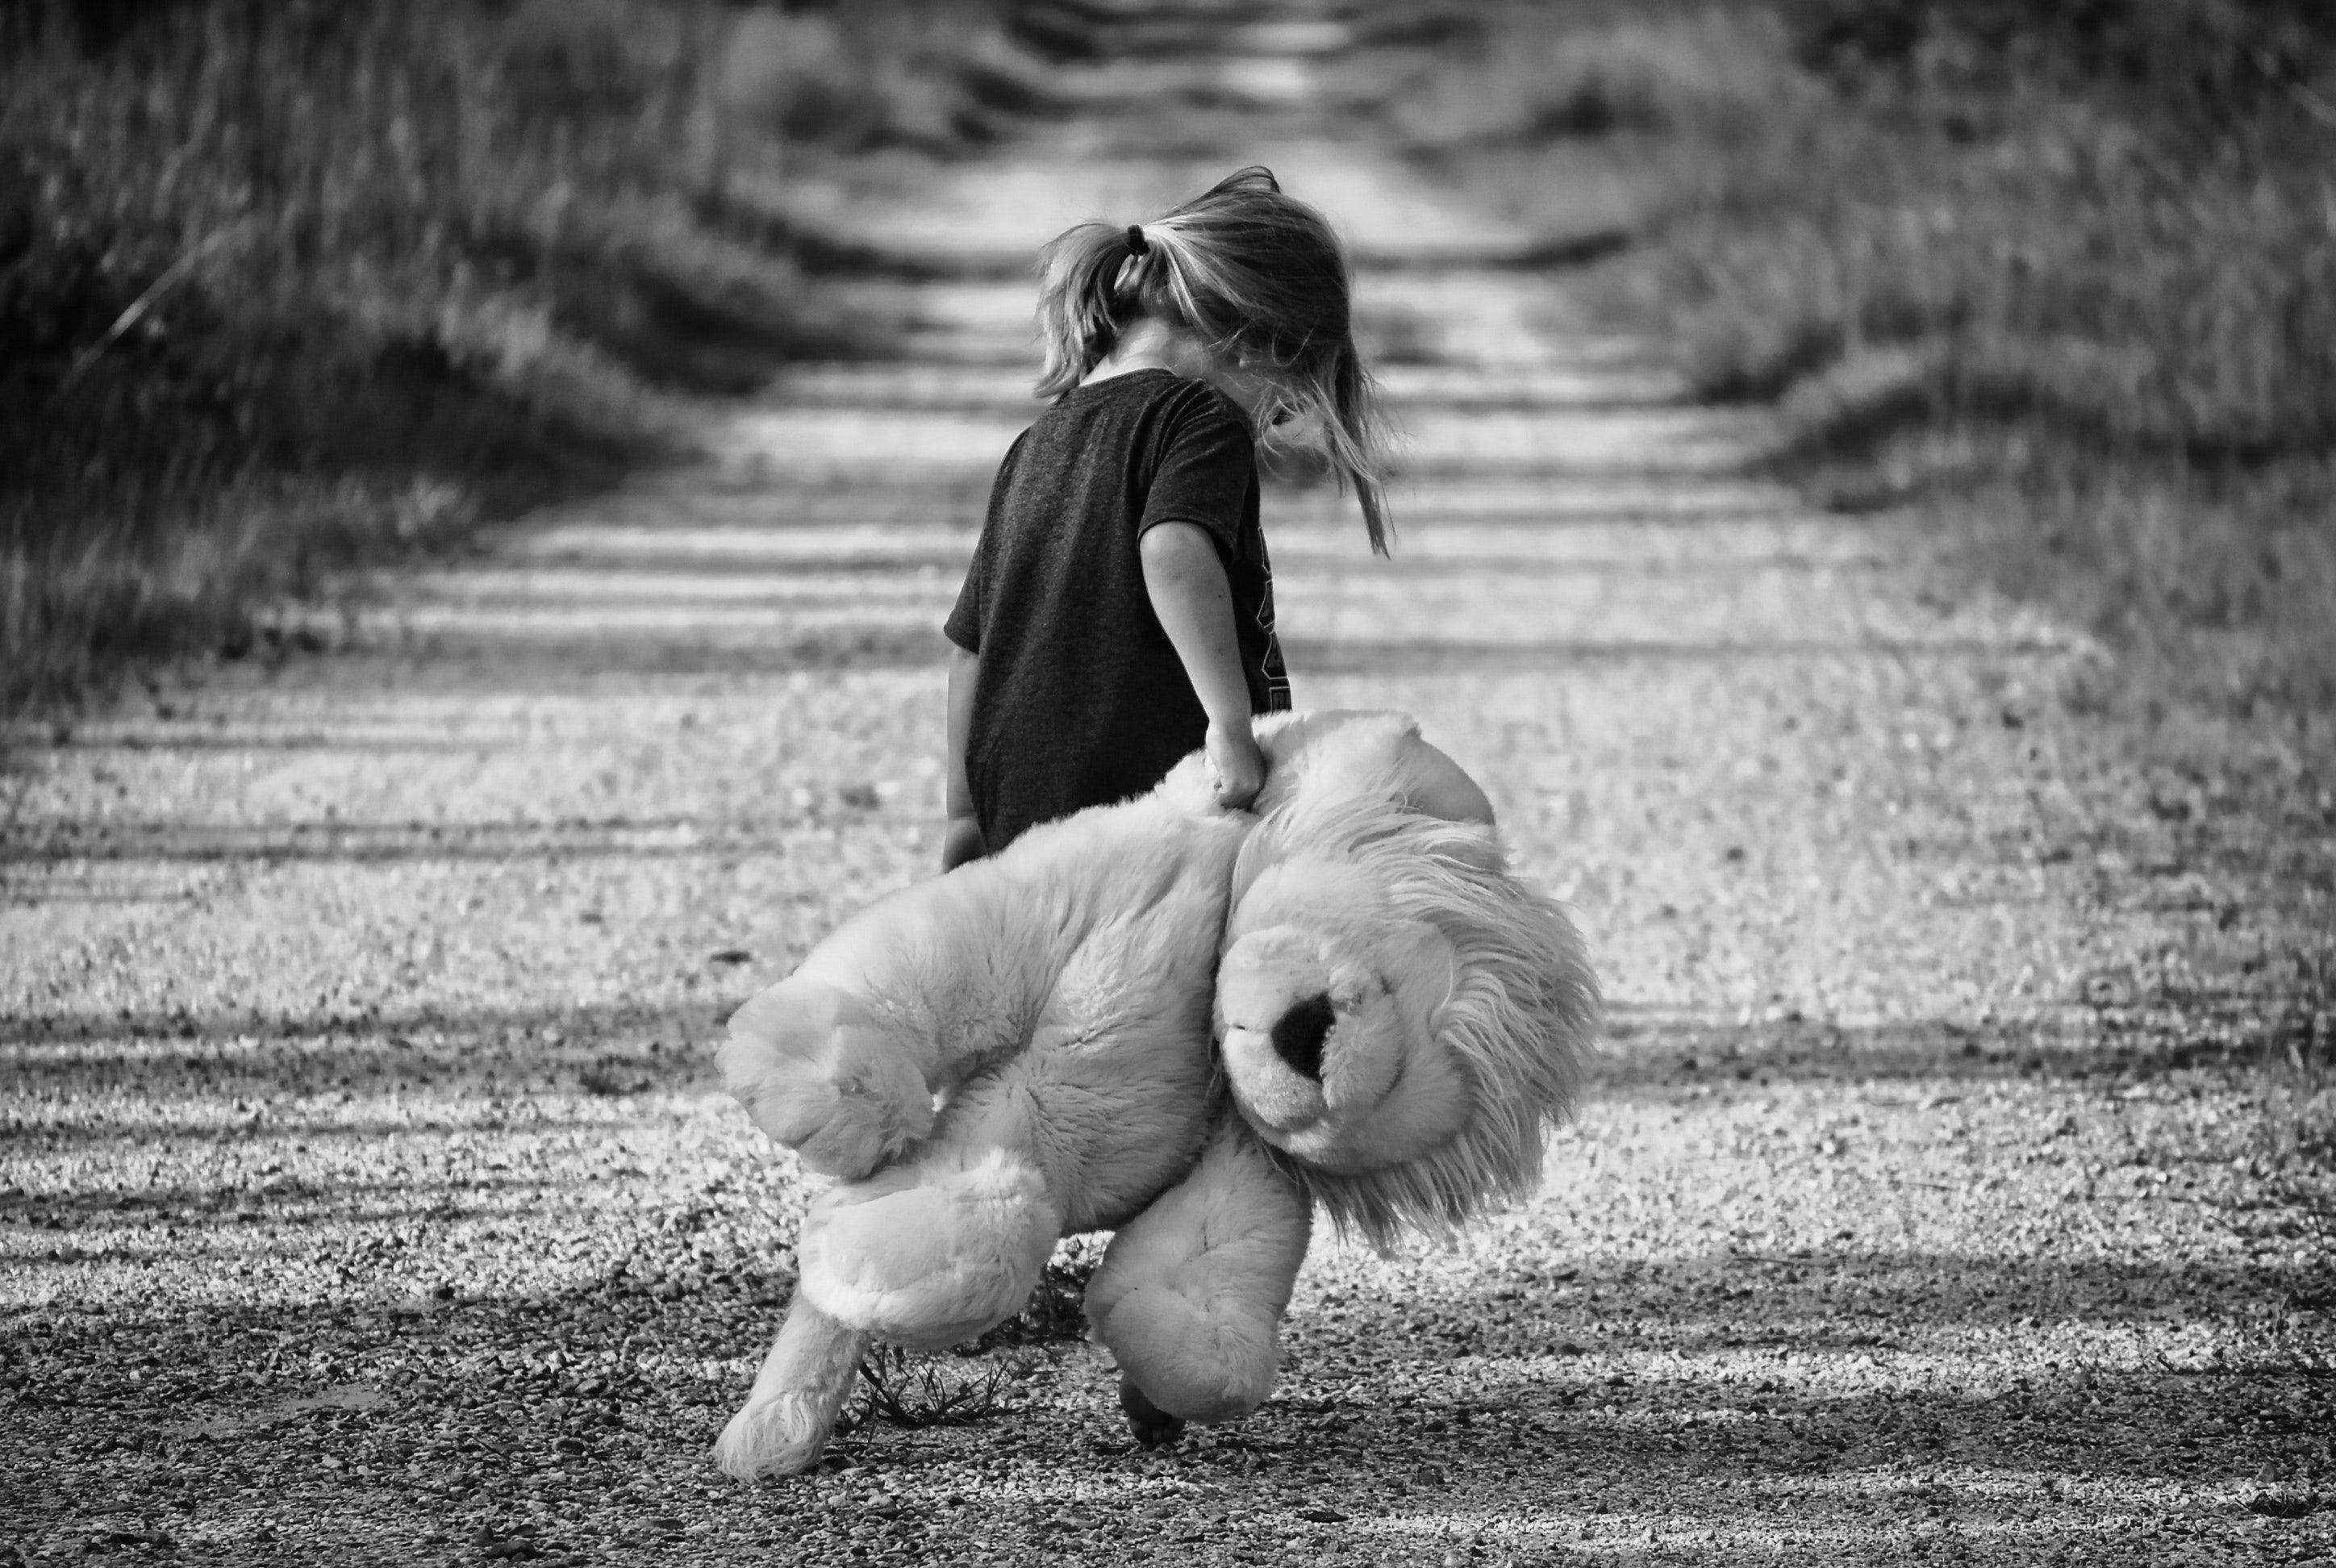 Grayscale Photography of Girl Holding Plush Toy · Free